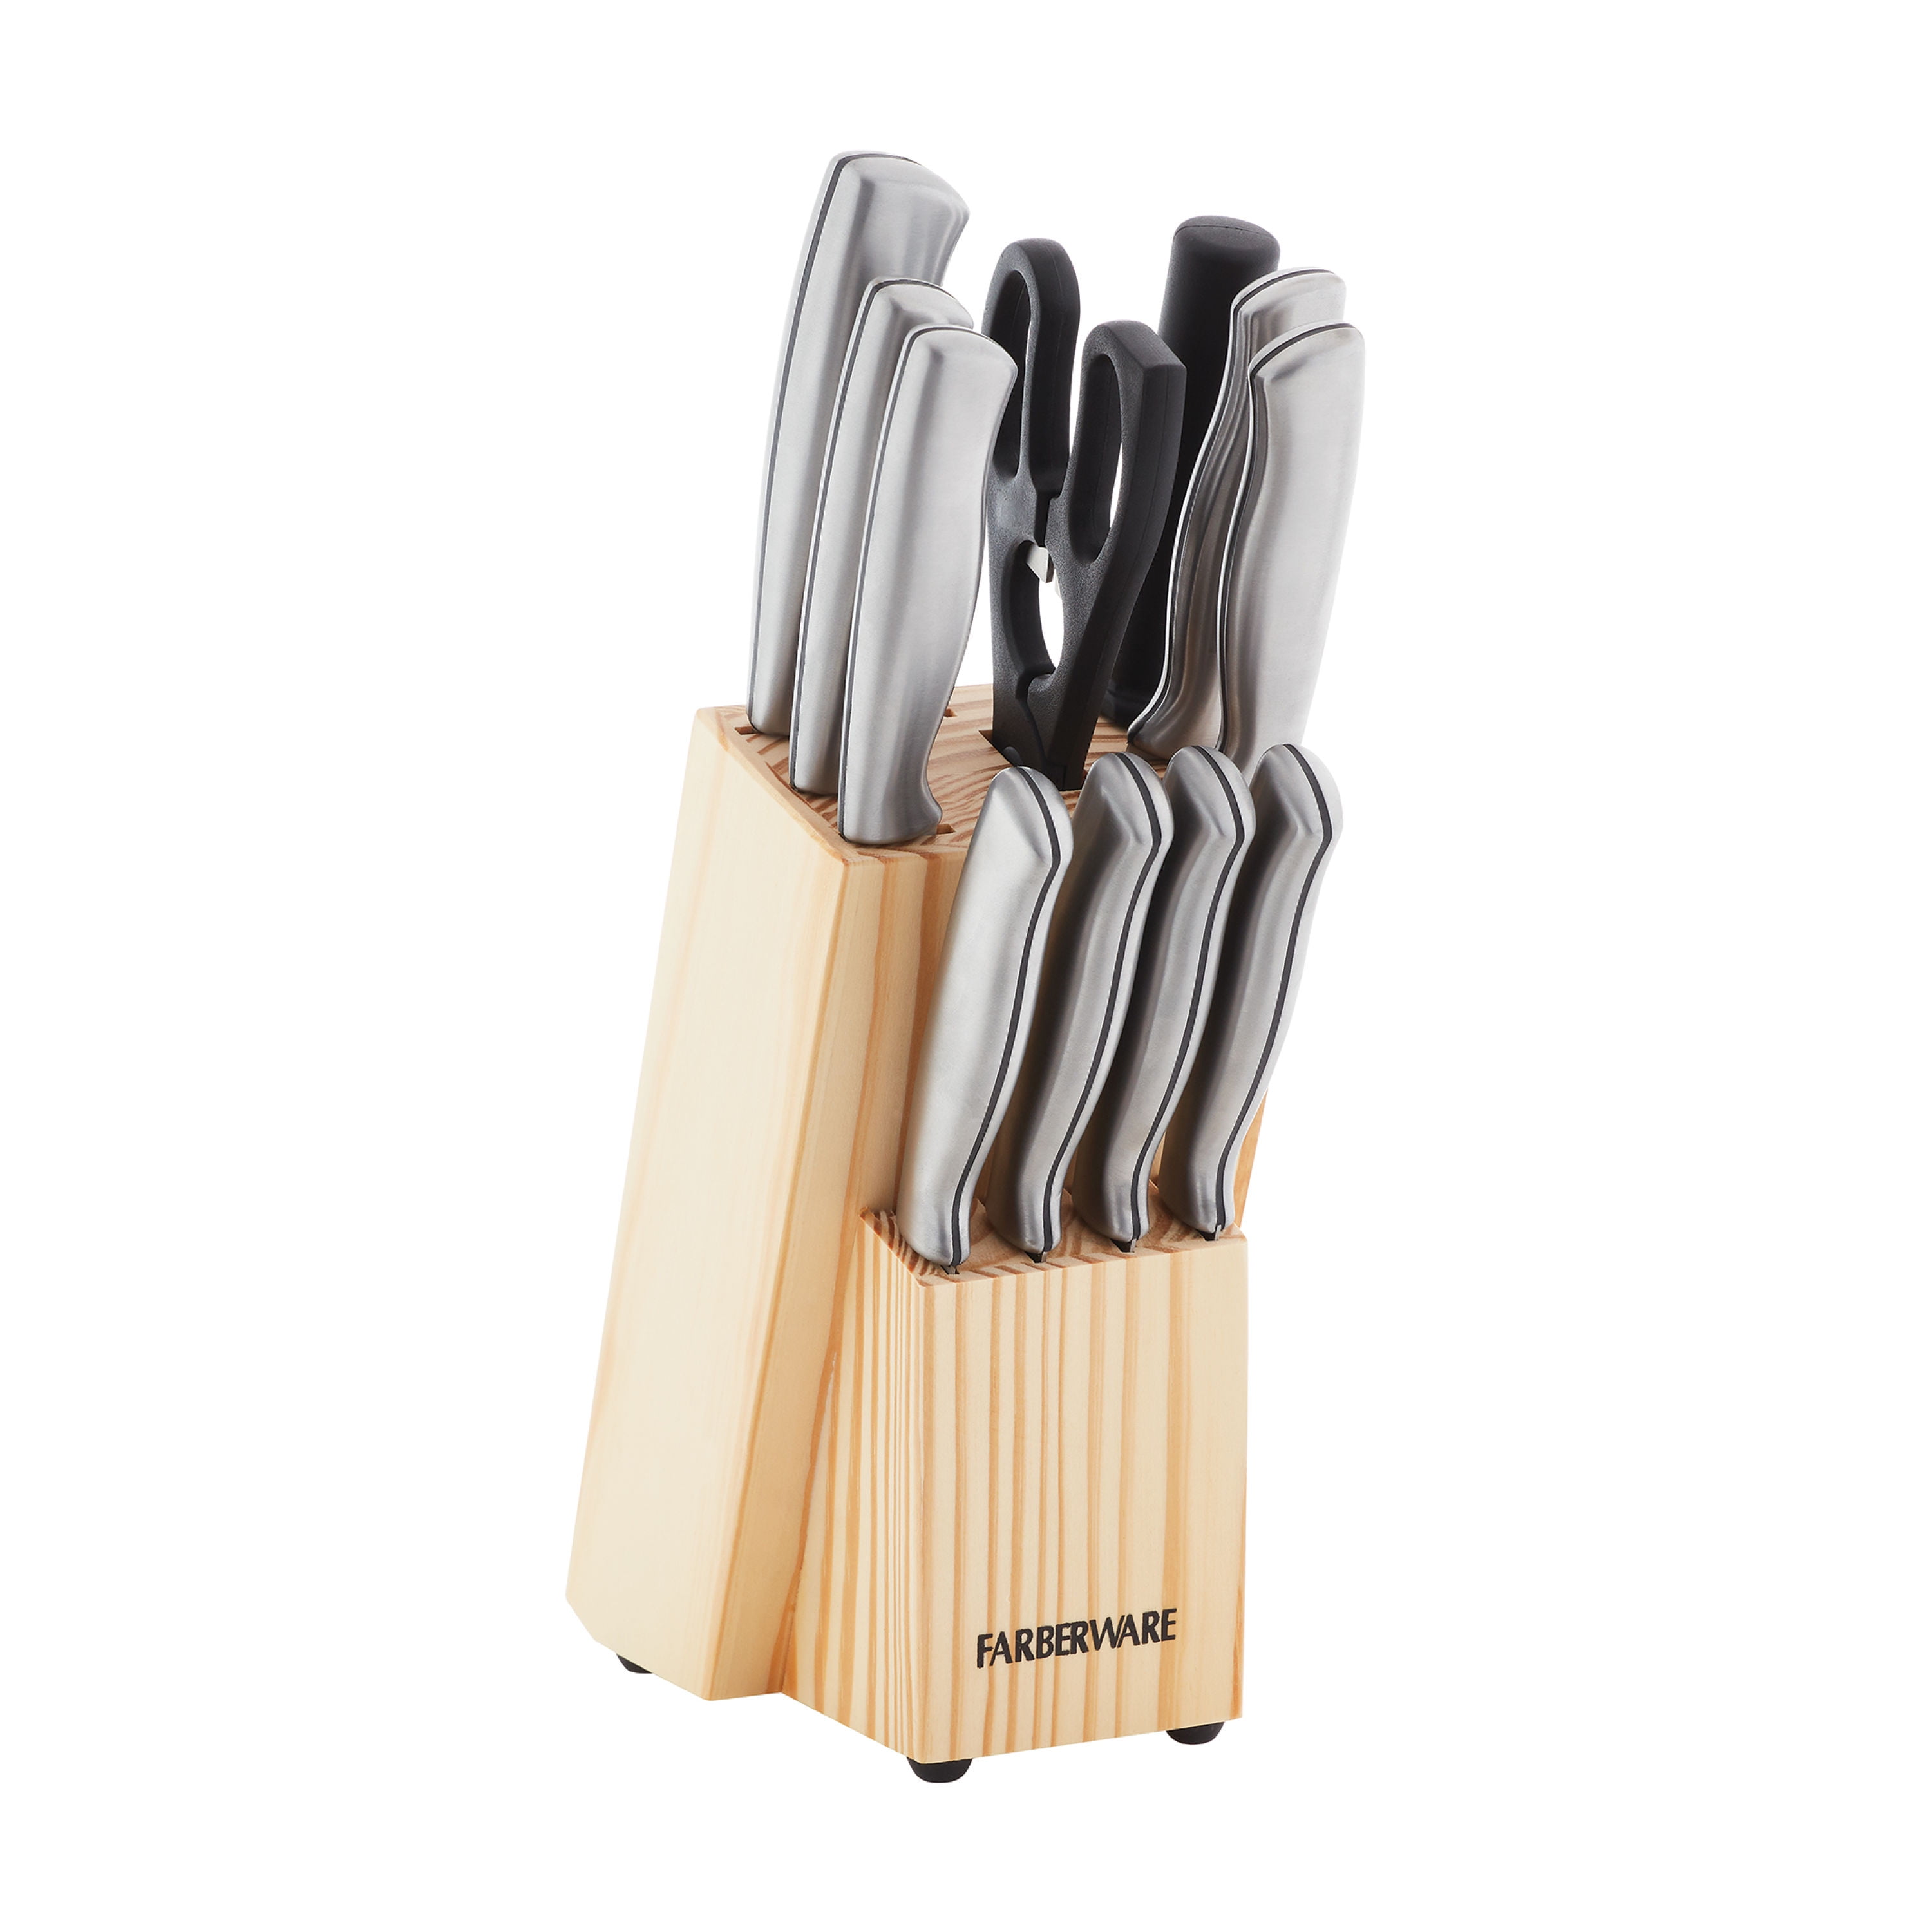 Farberware Classic 12-Piece stamped stainless steel cutlery set Farberware Stainless Steel Cutlery Set